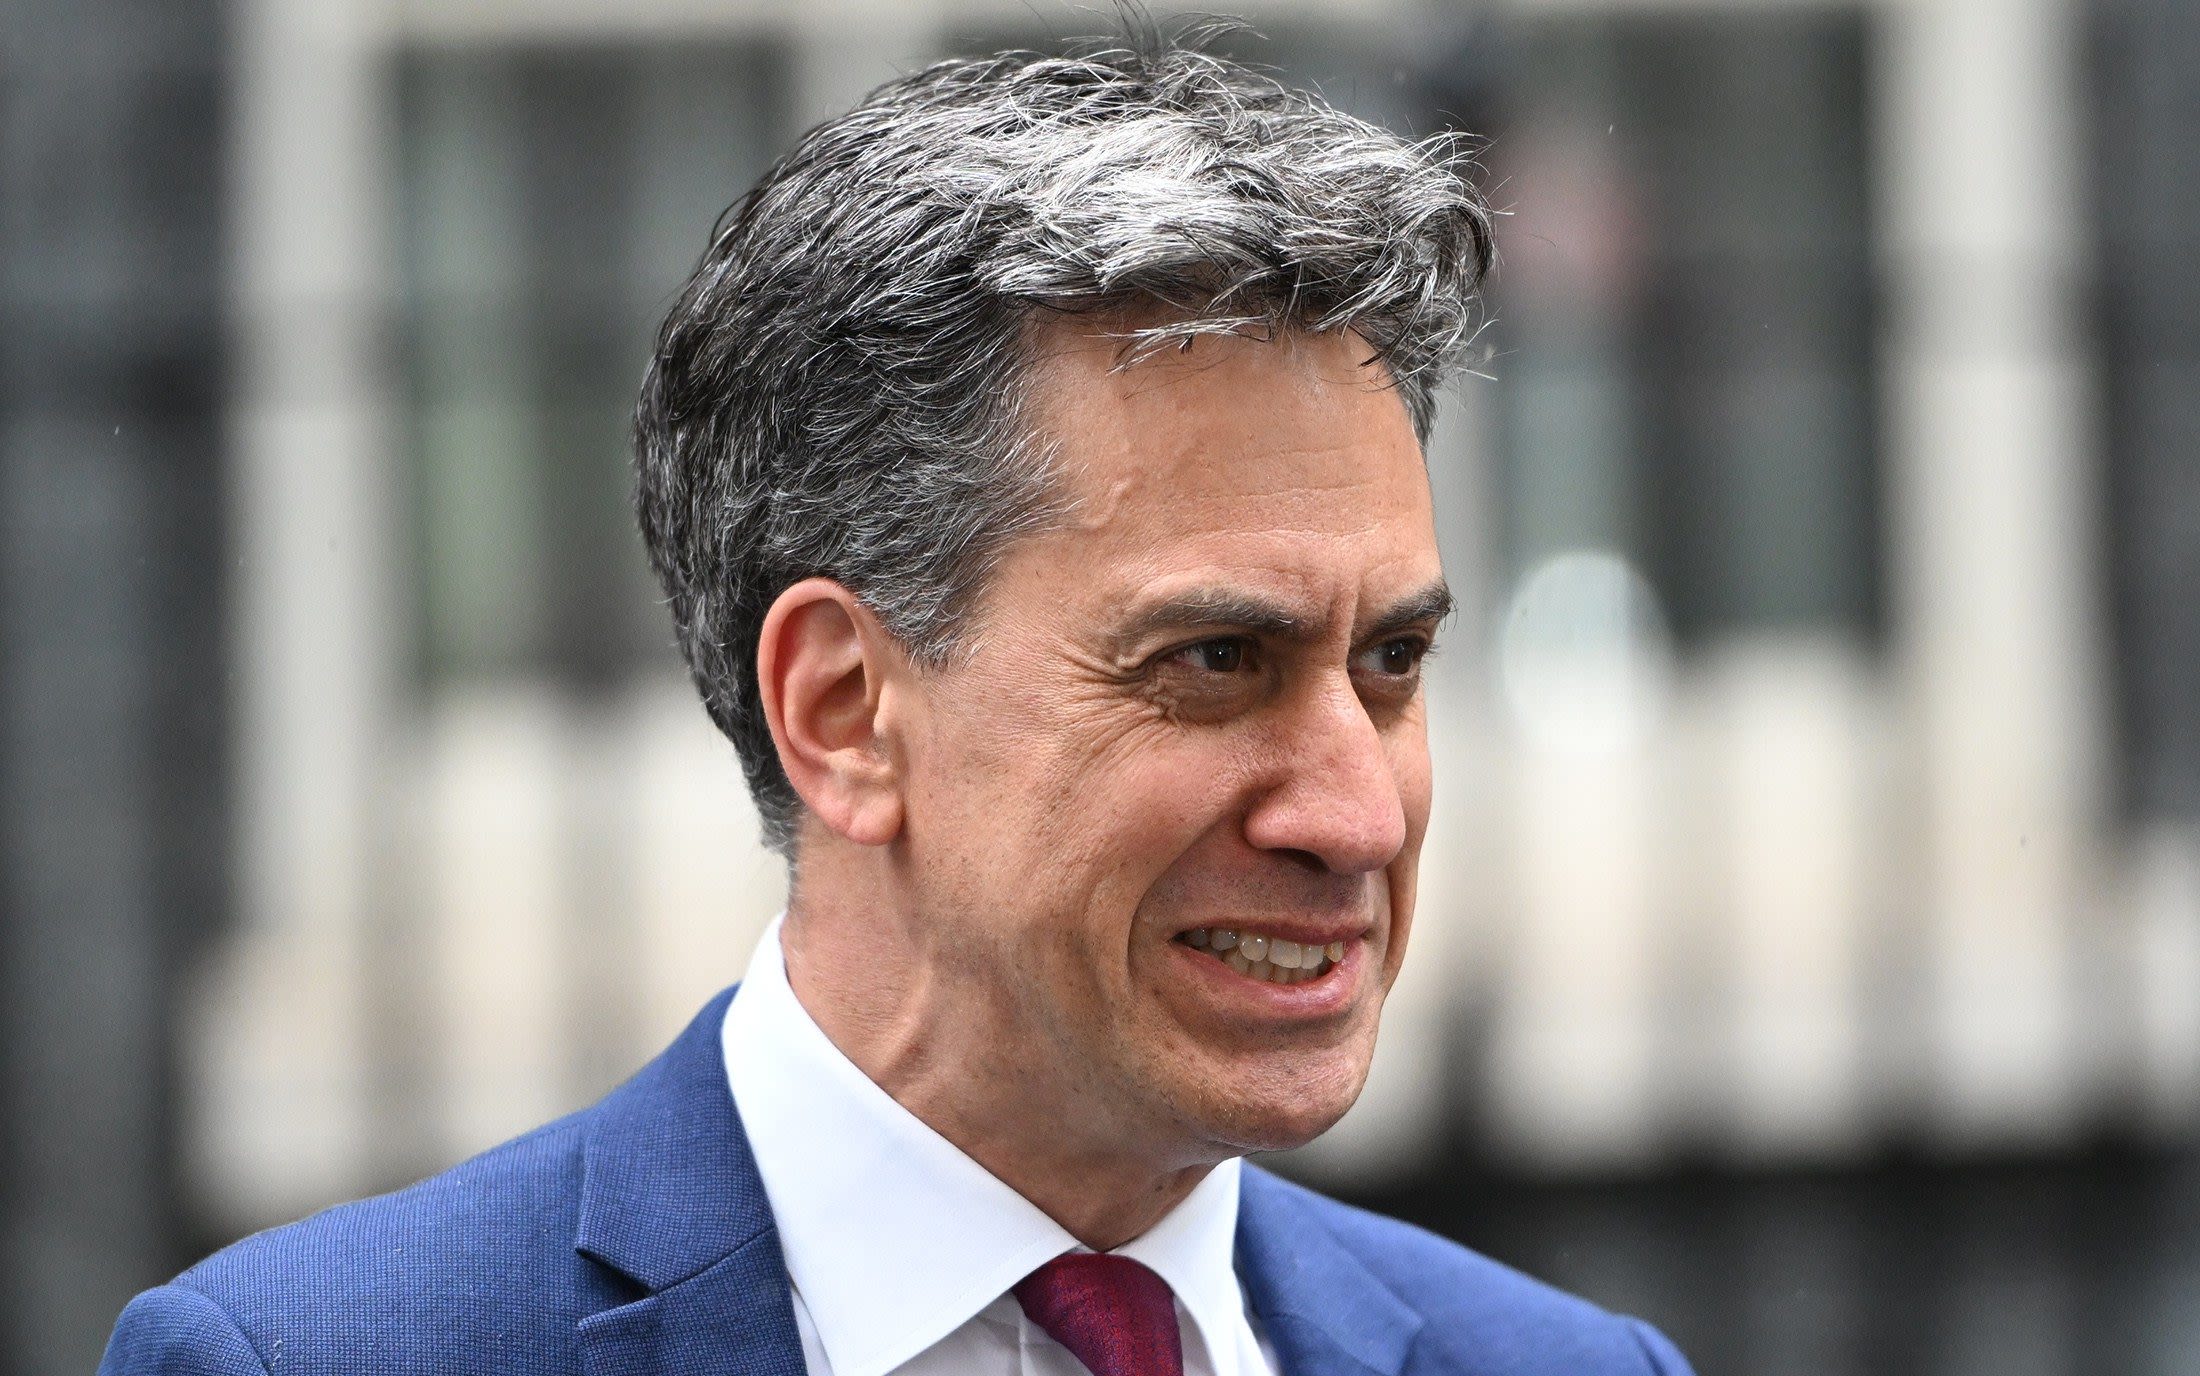 Labour’s feel-good factor won’t last long if Ed Miliband has anything to do with it